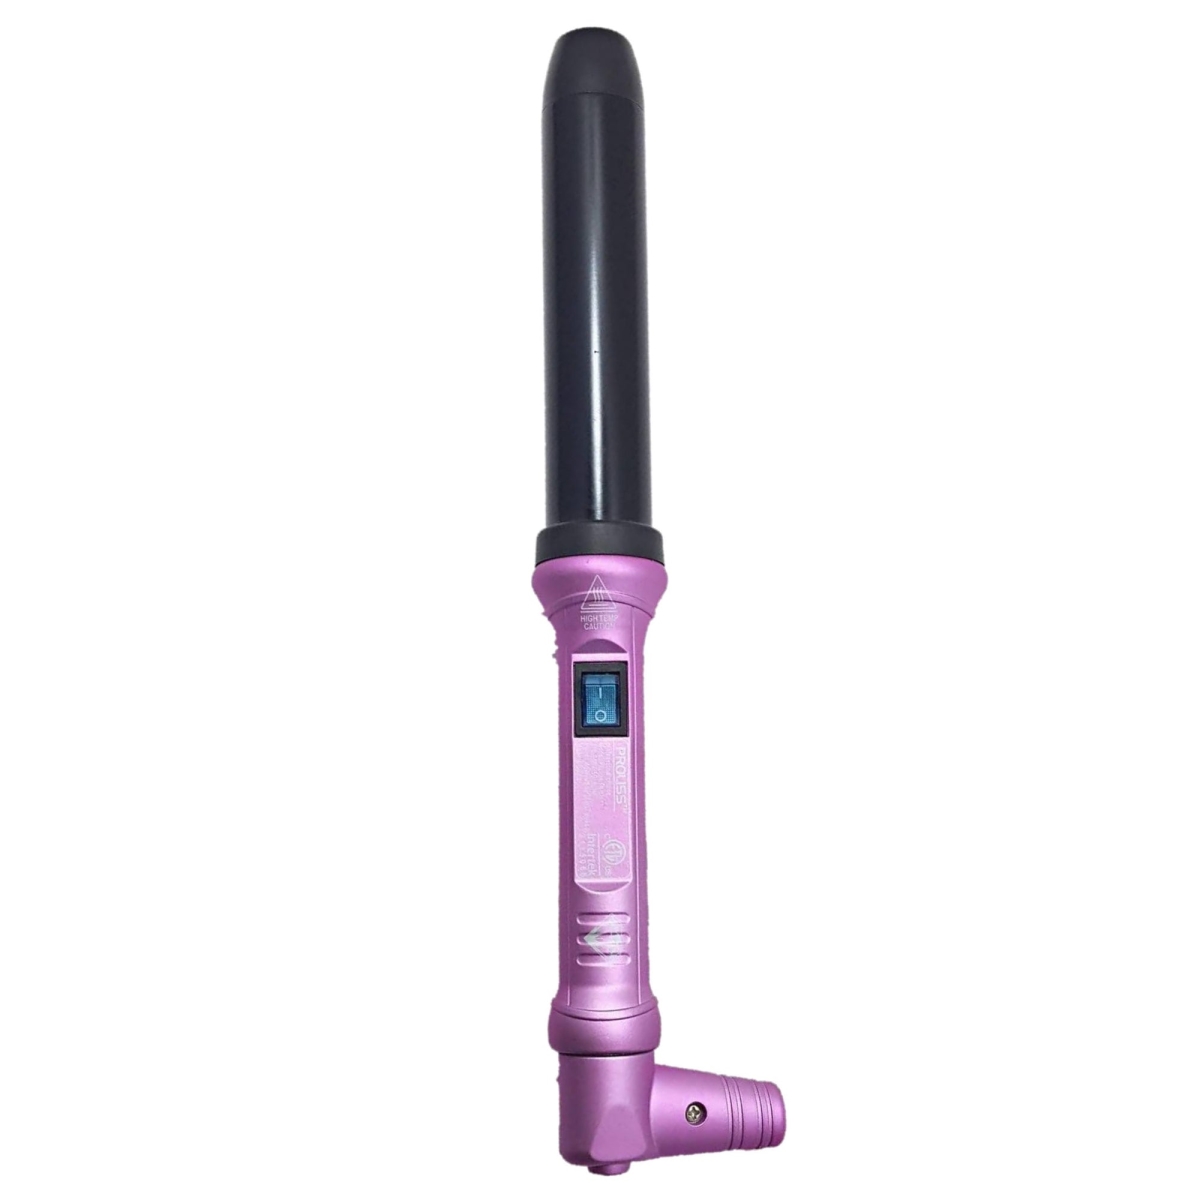 Picture of Proliss PROTWDCPKPL32MM-117DC The Twister - 32mm Digital Tourmaline-Infused Ceramic Pro Curling Wand w/ Cool Tip - Diamond Collection - Metallic Pink Pearl